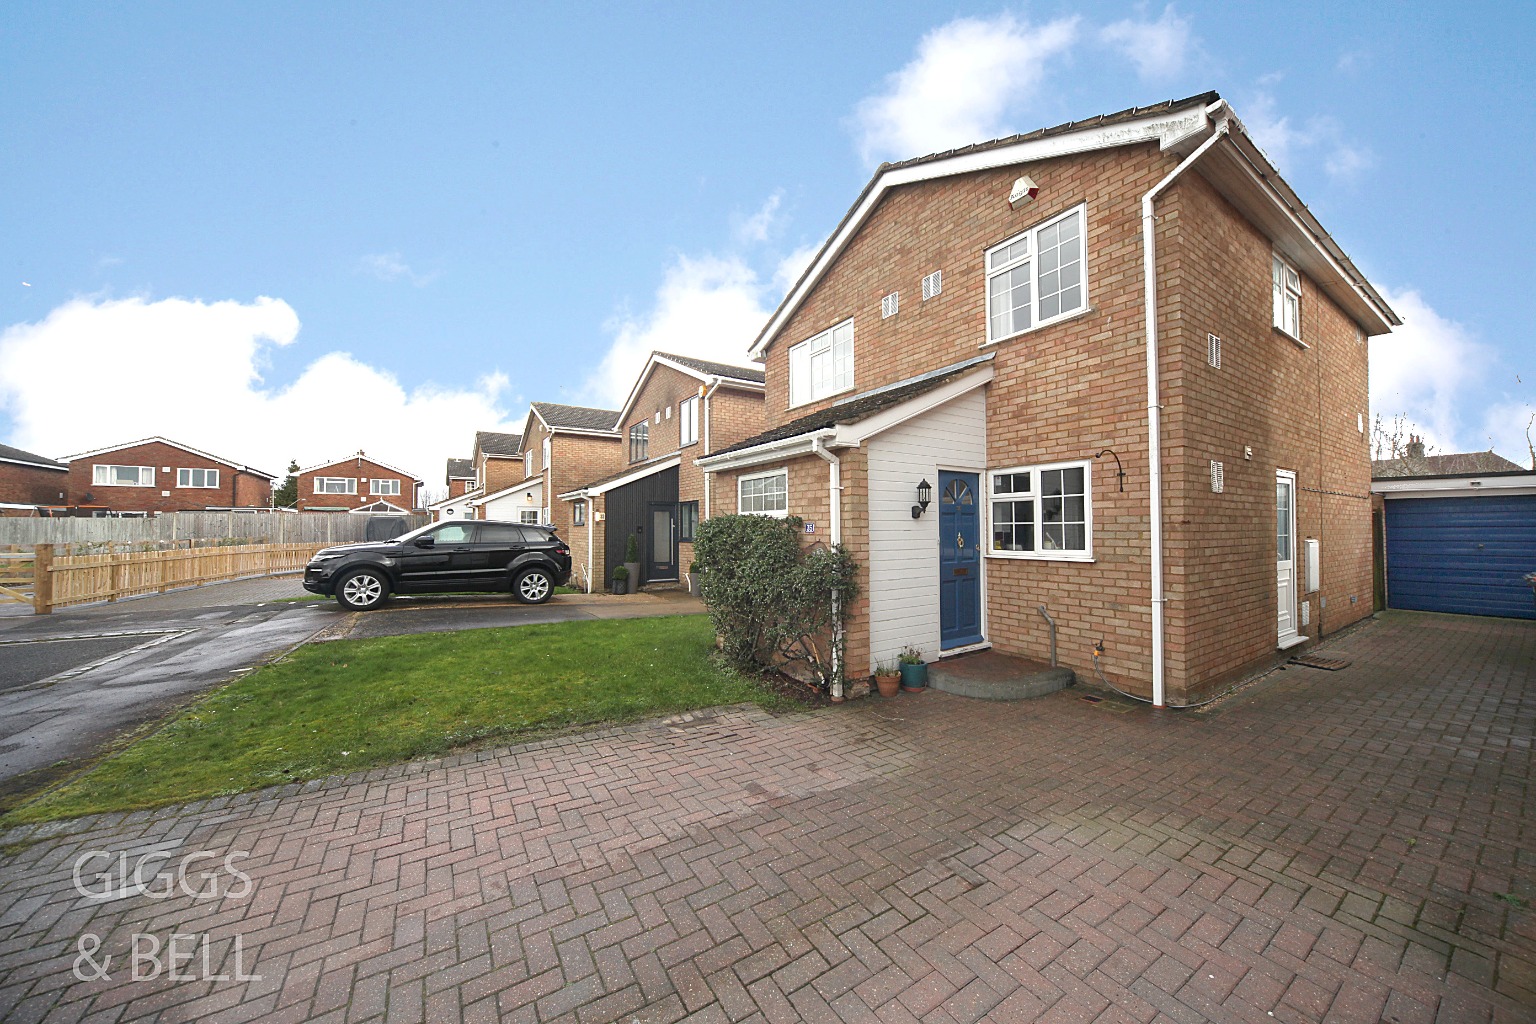 4 bed detached house for sale in Claydown Way, Luton, LU1 